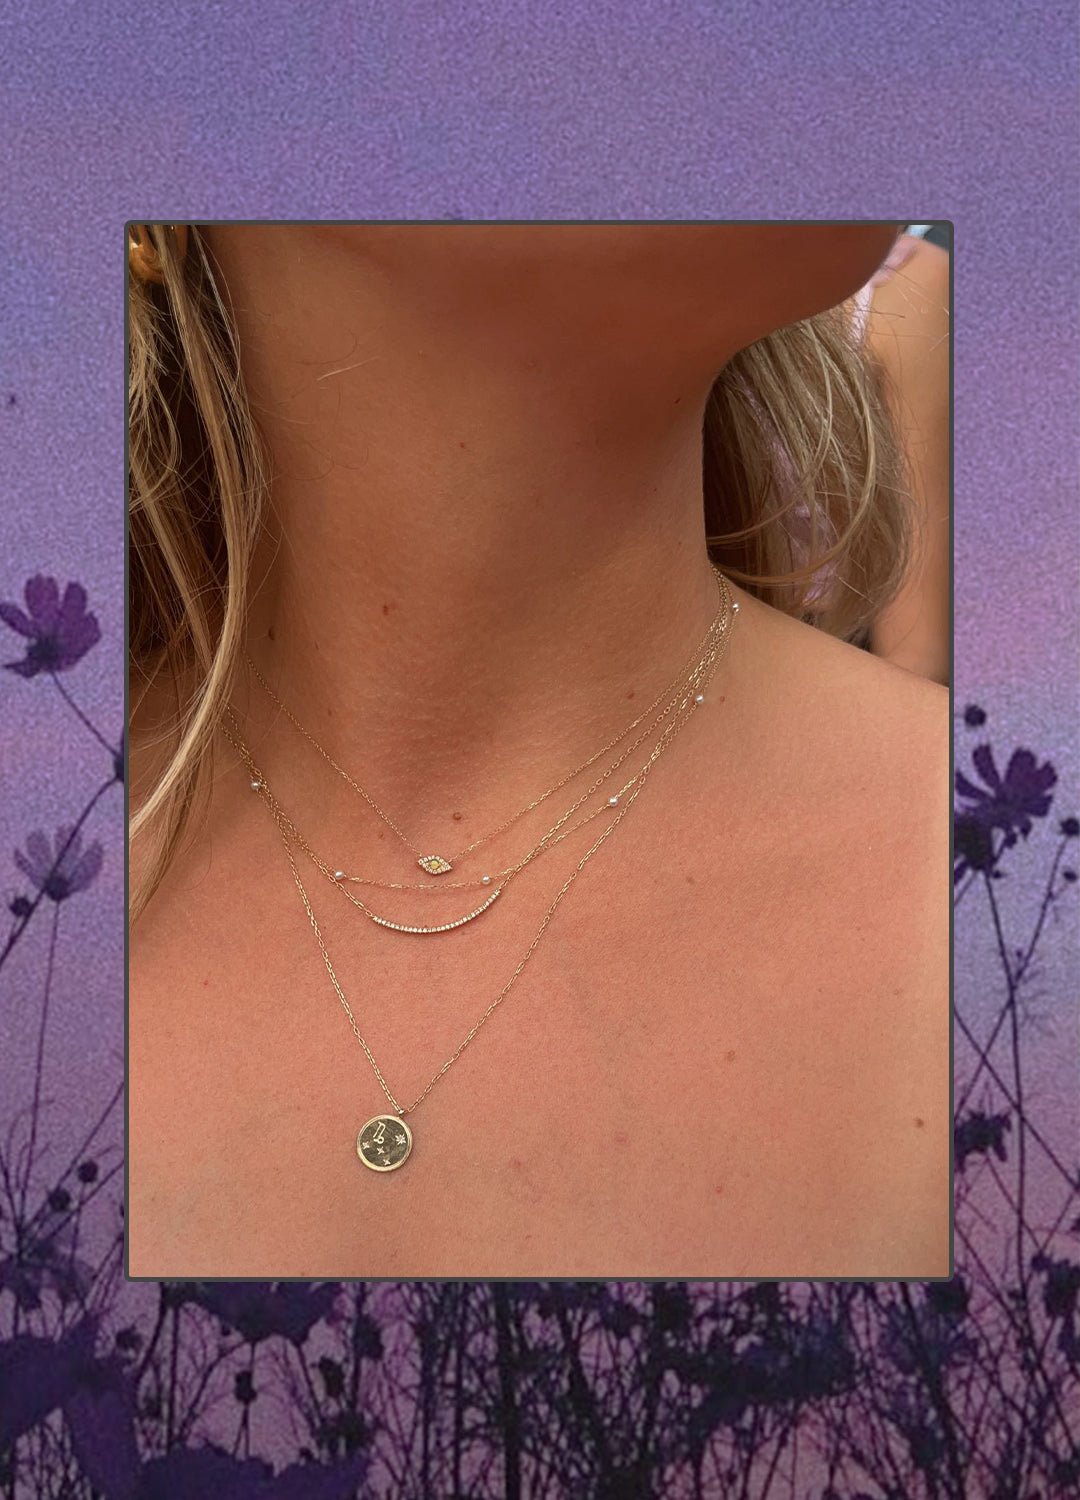 Woman wearing 14k gold and diamond necklaces.